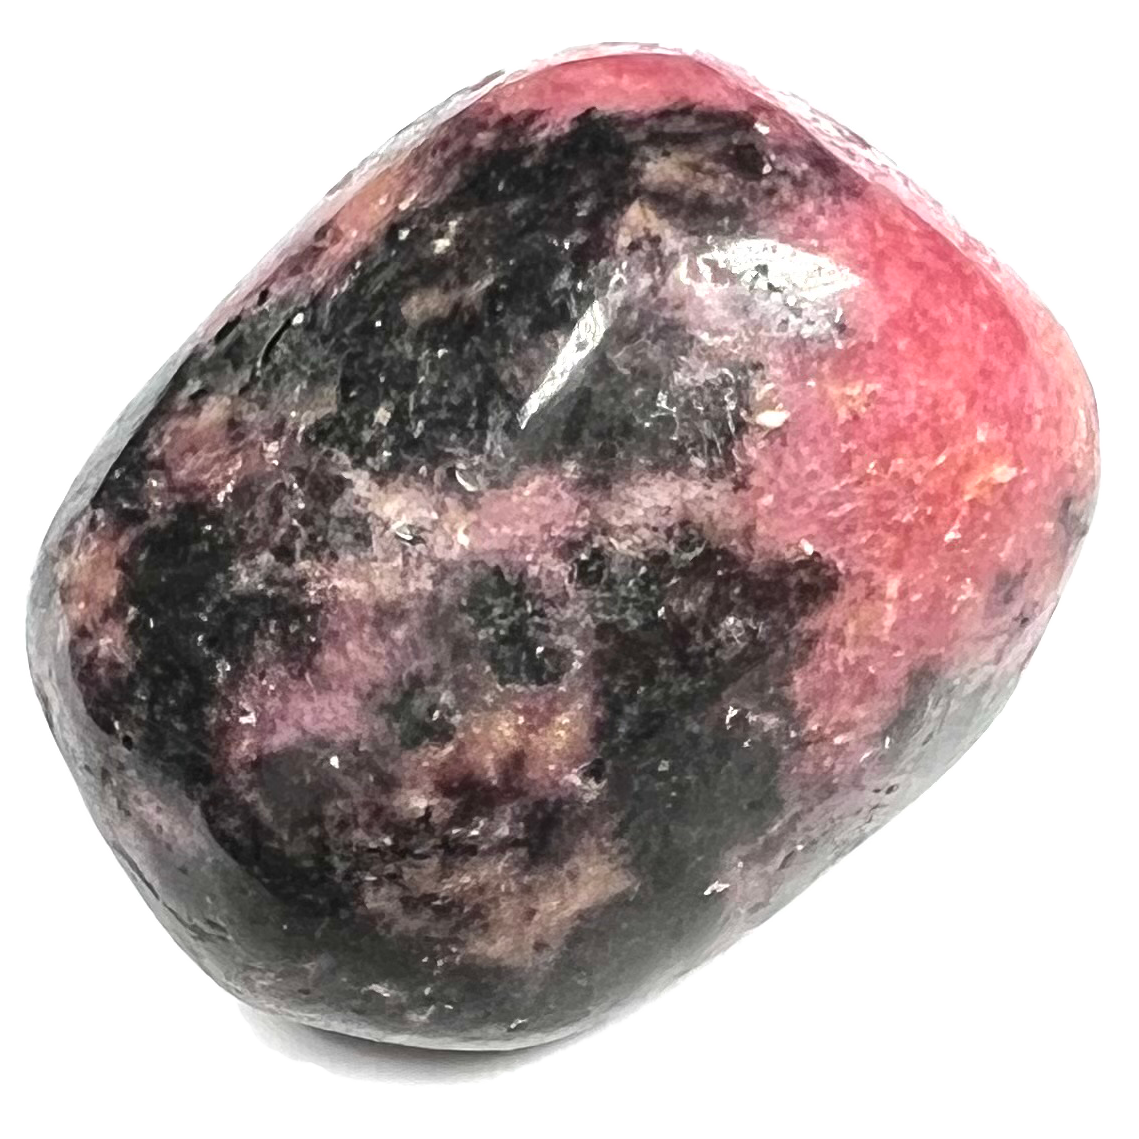 A tumbled rhodonite stone from Mozambique, East Africa.  The stone is pink with black spotting.